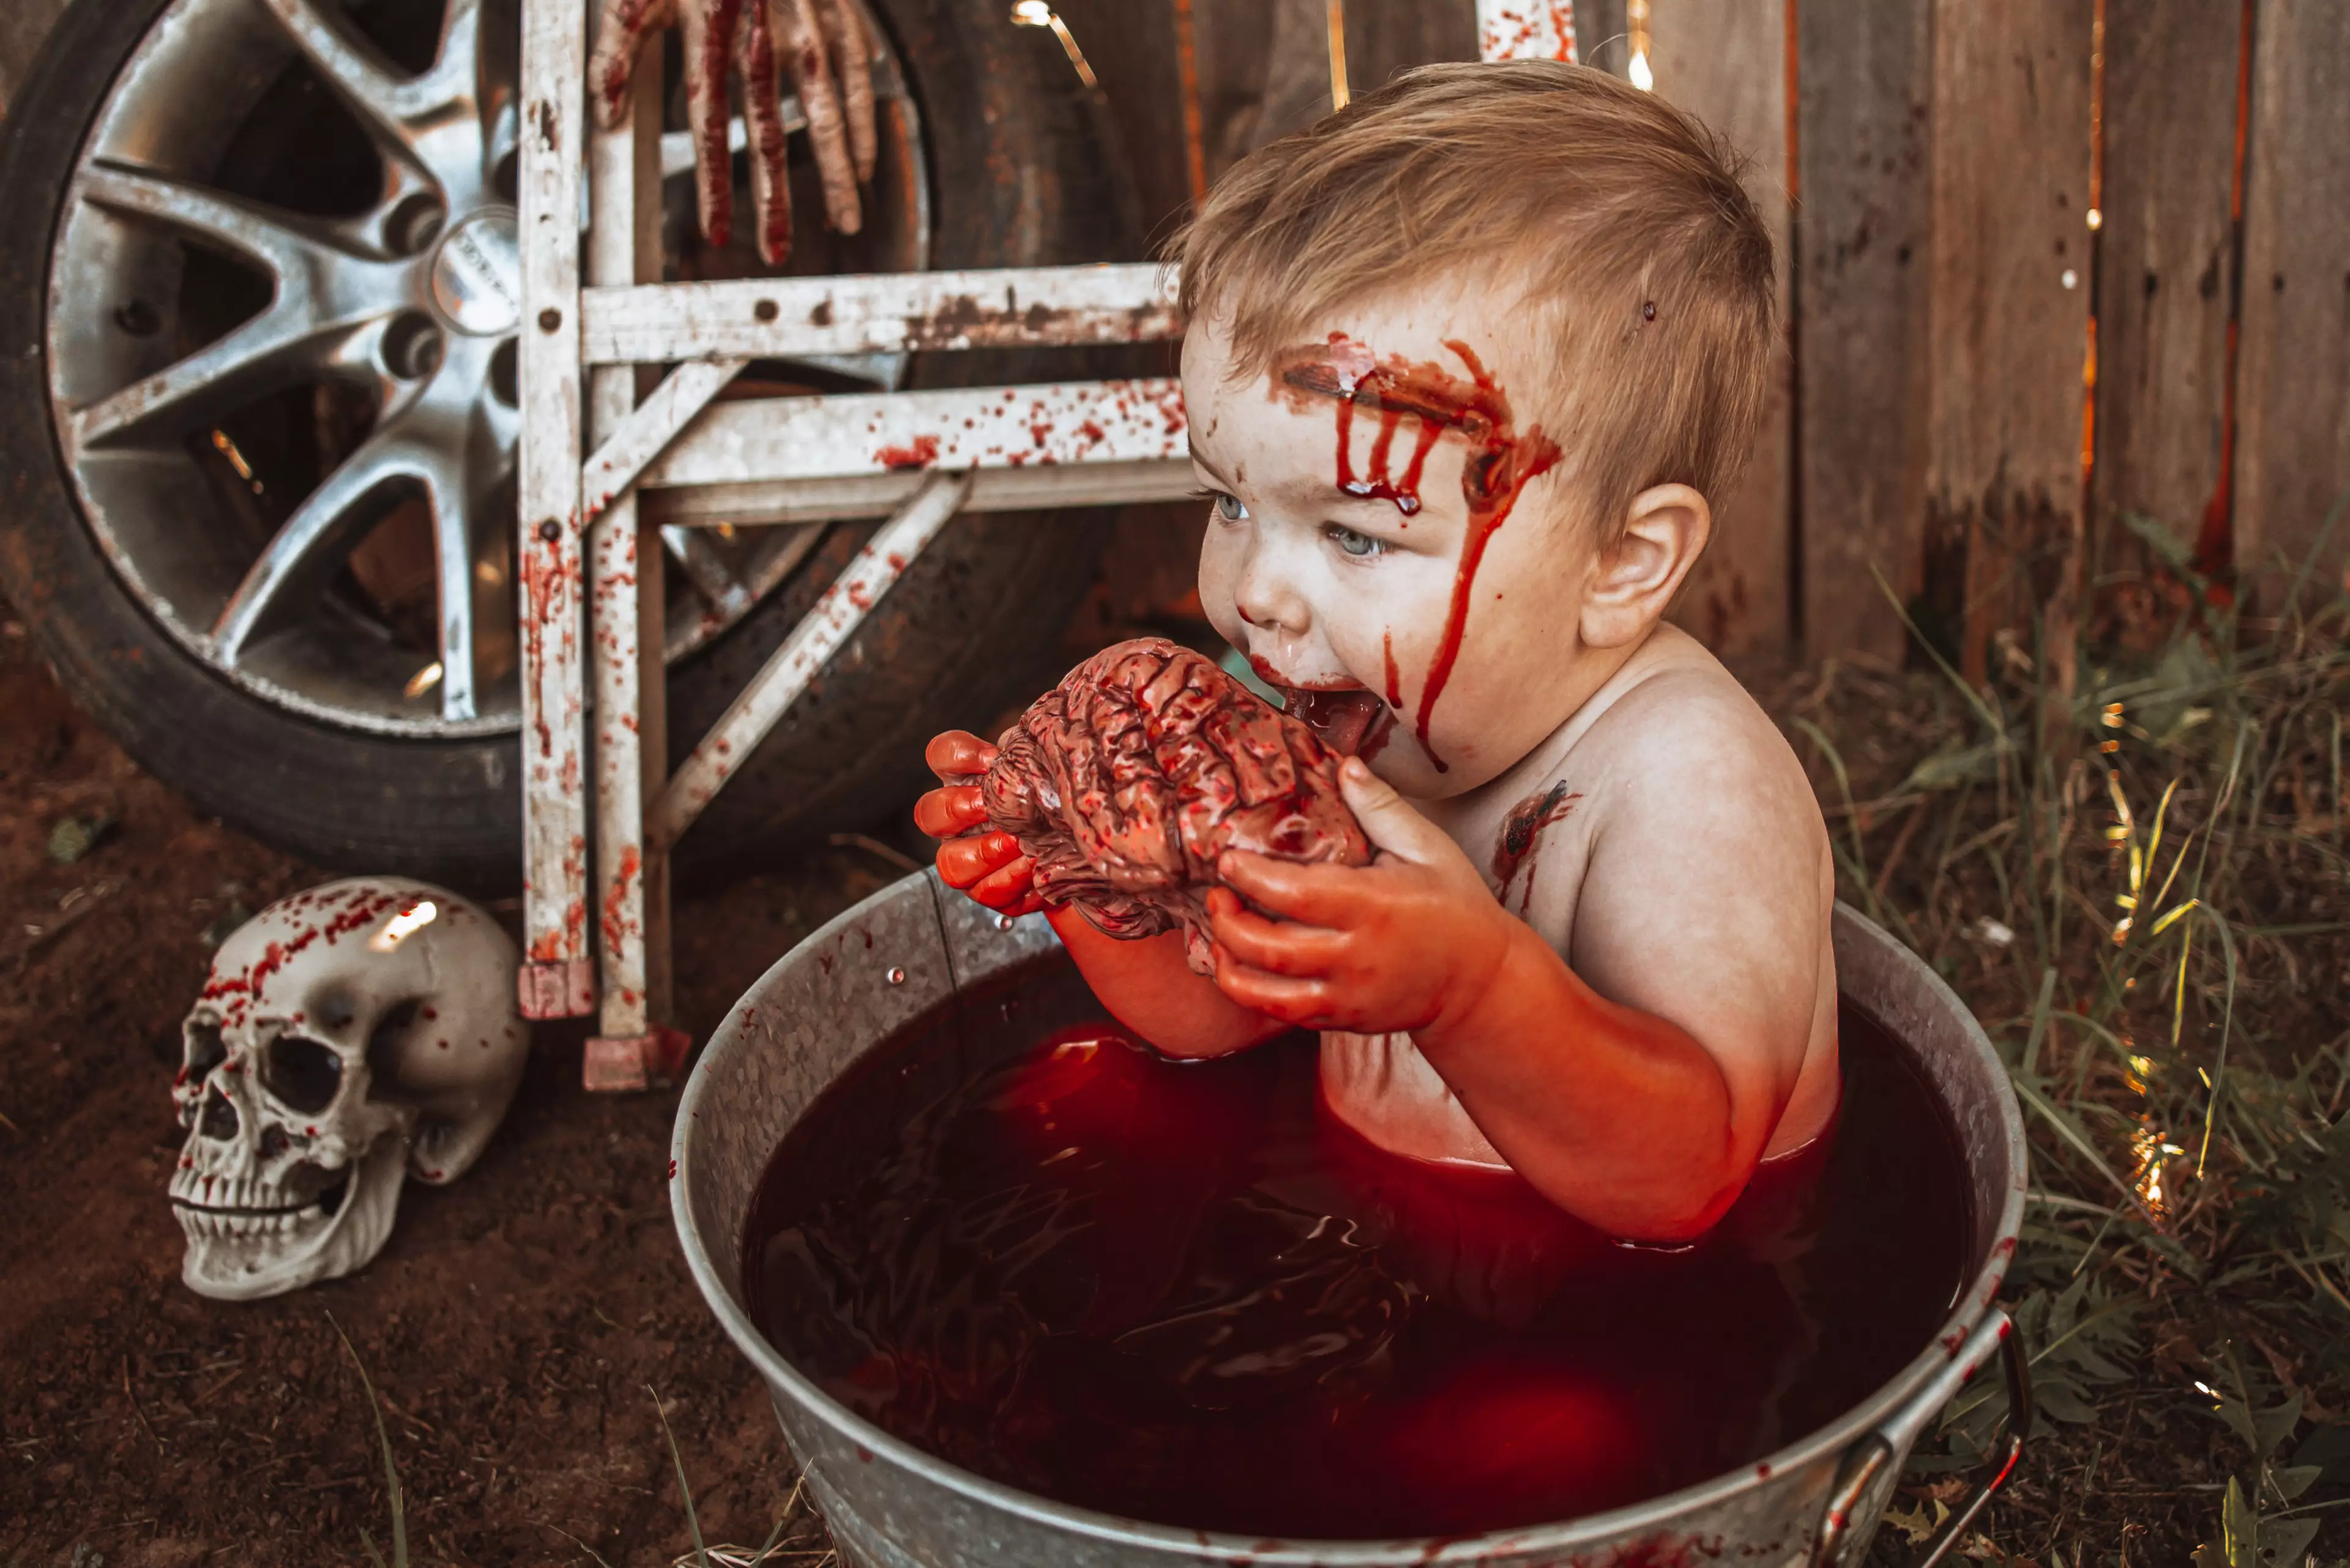 The gory zombie-themed photos divided people (